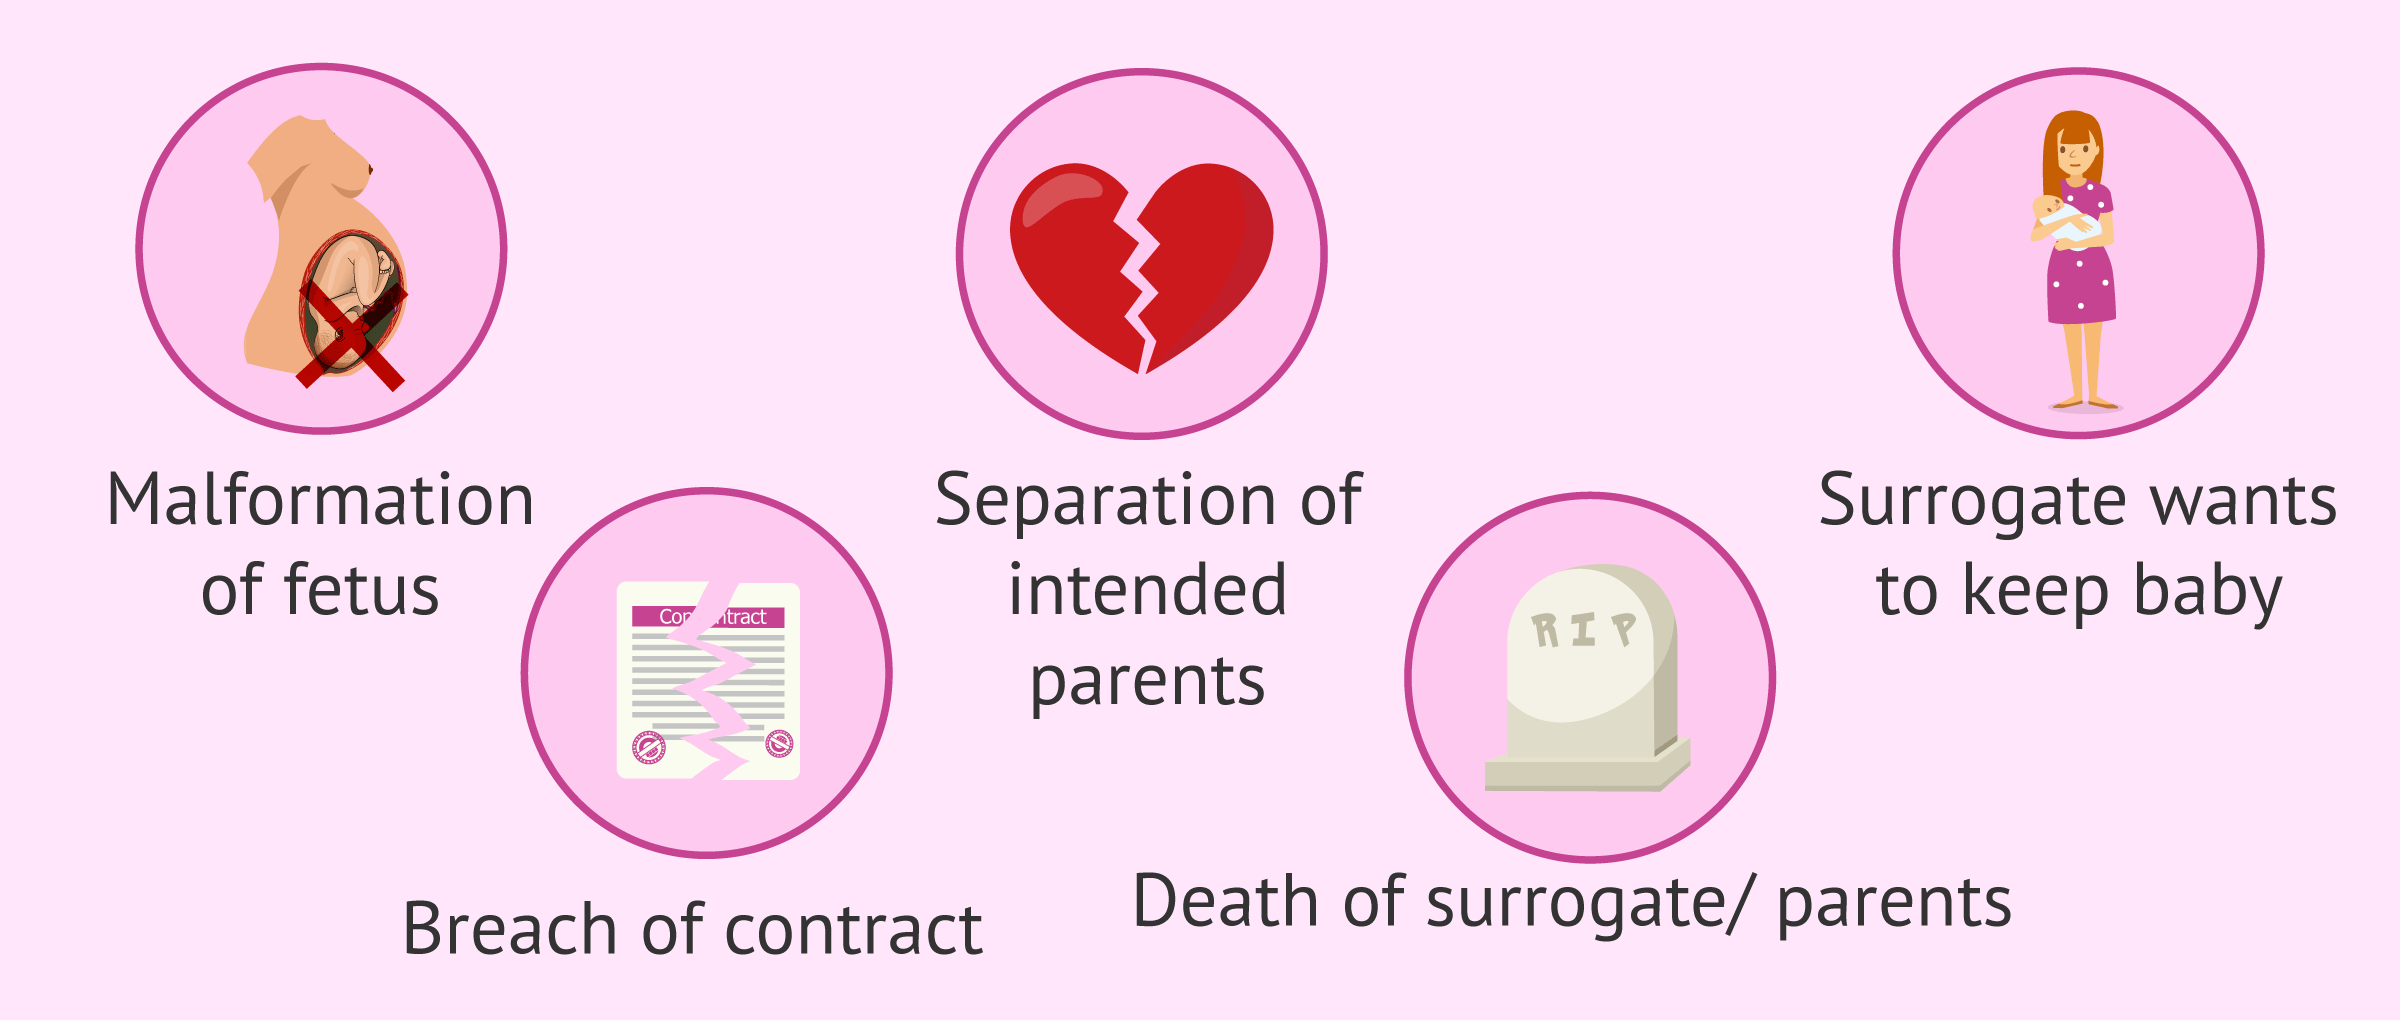 Possible problems that may arise in surrogacy